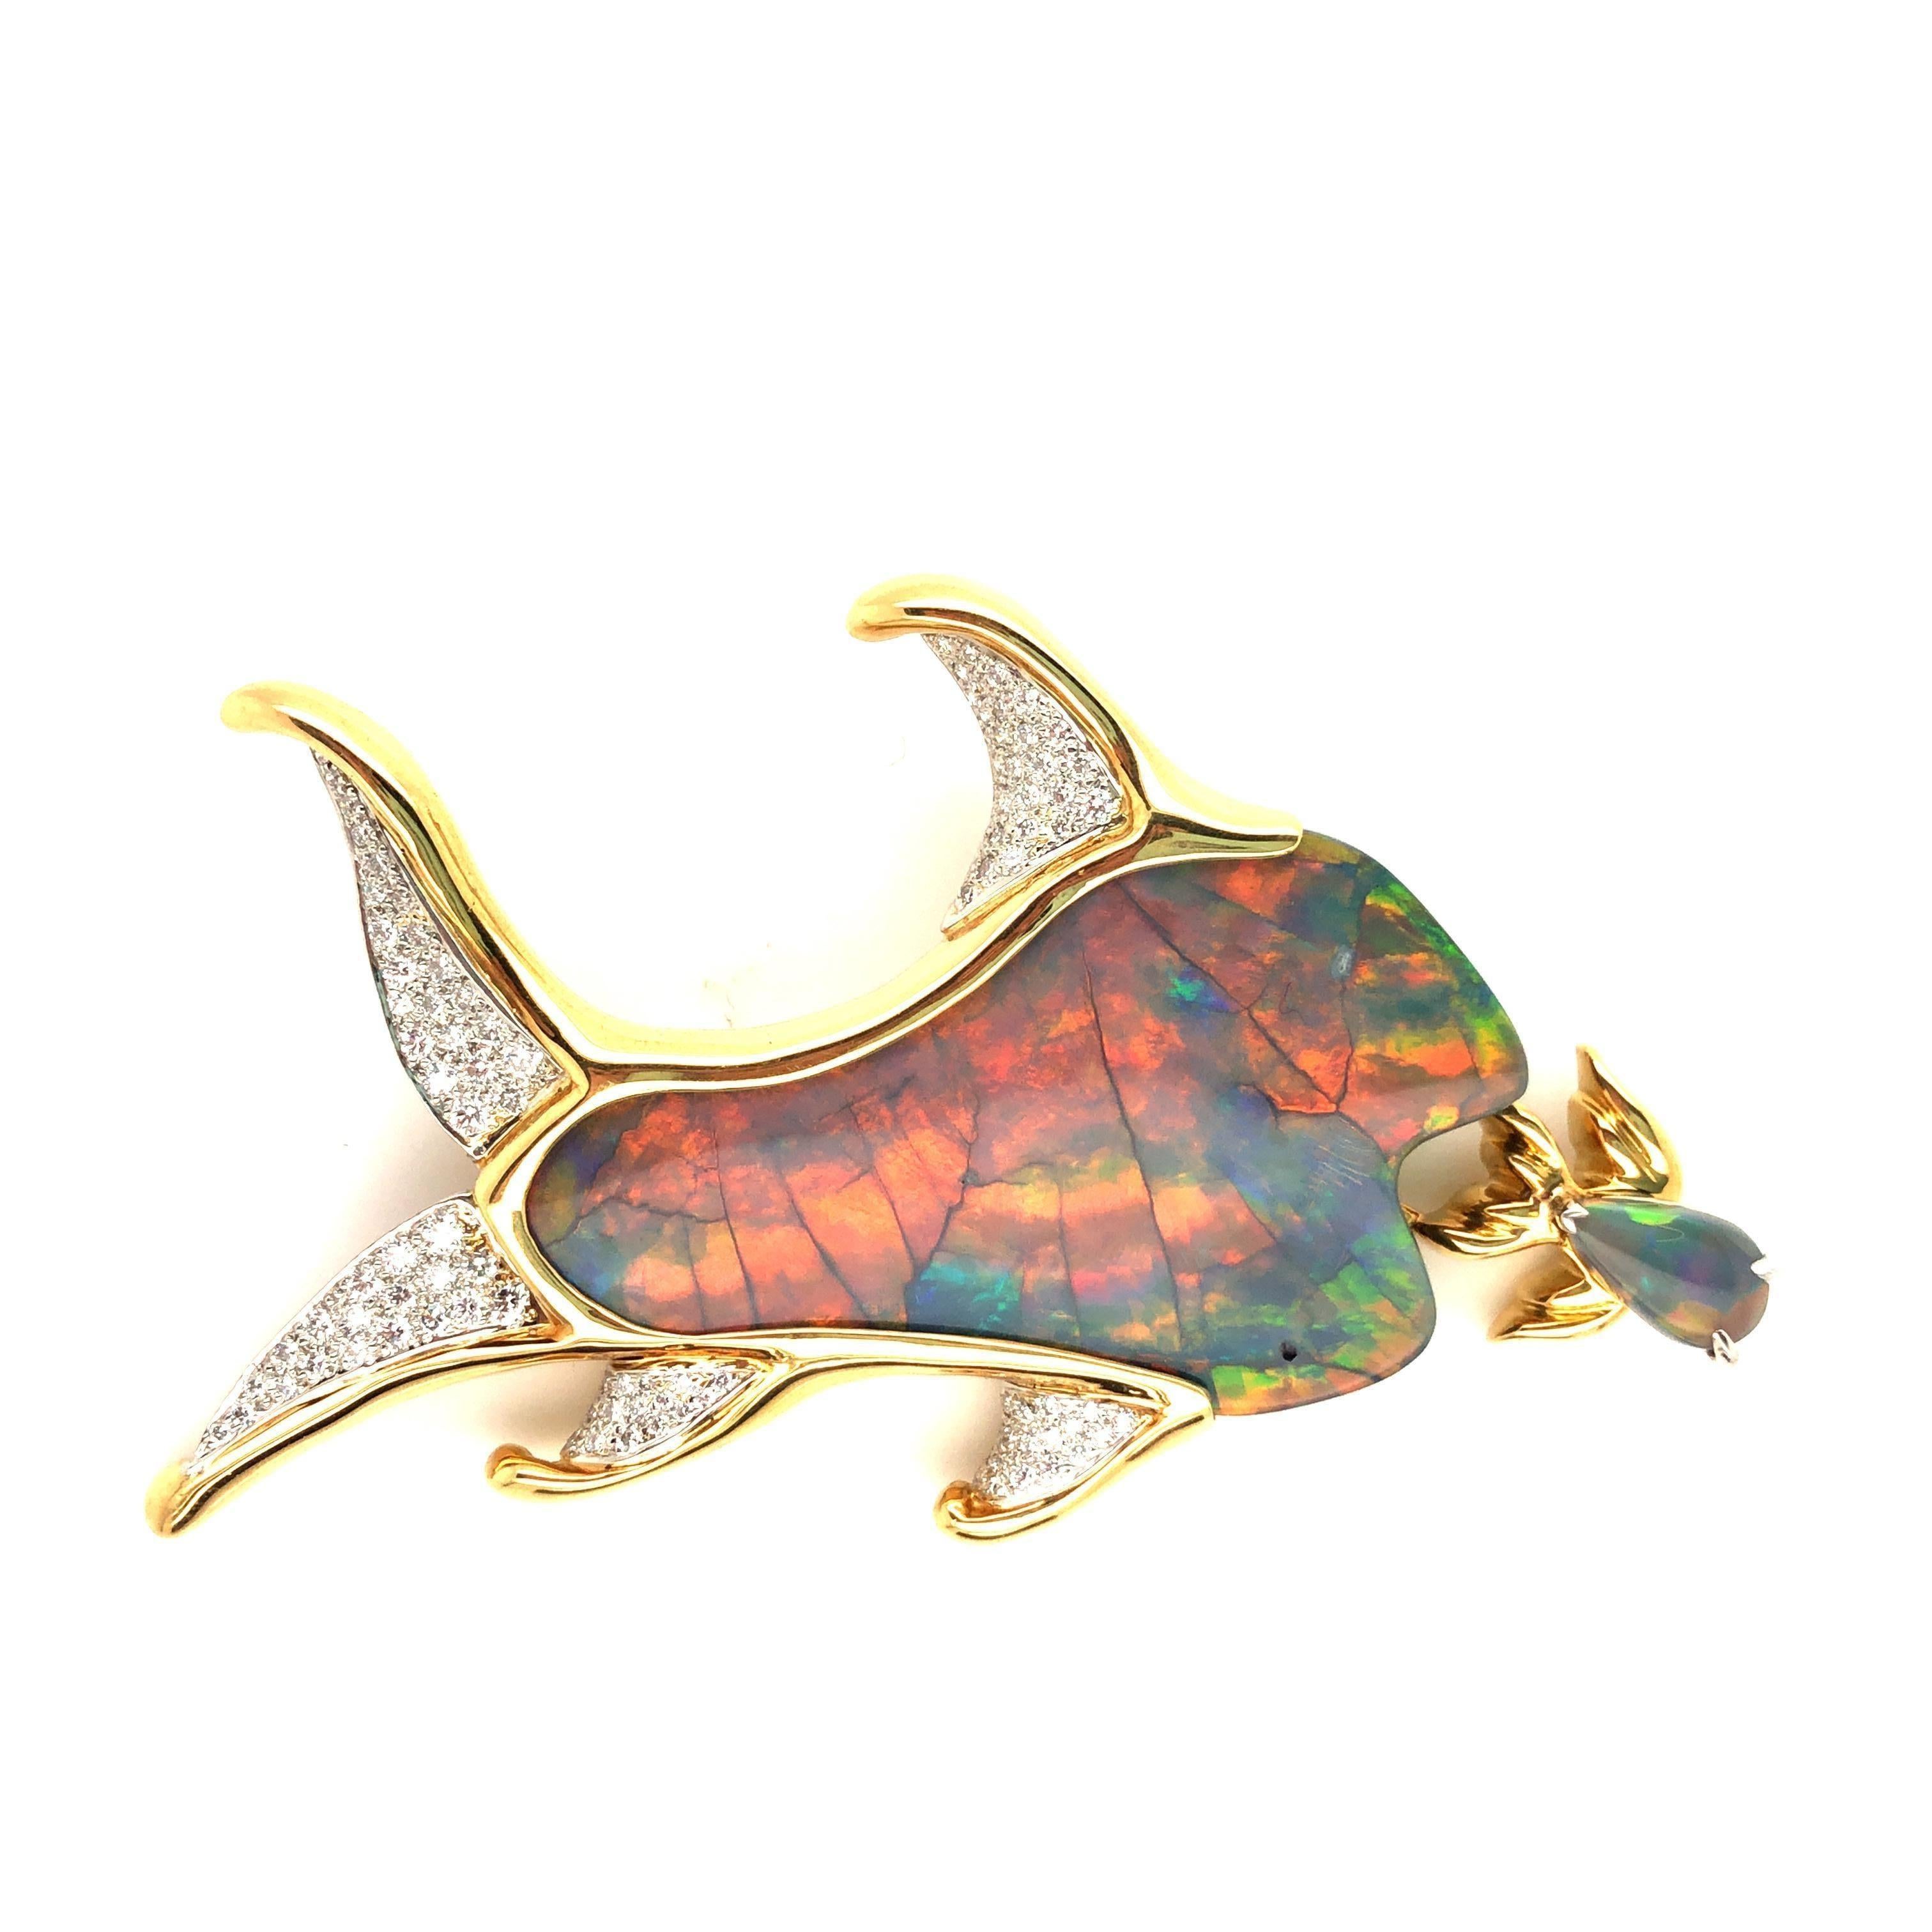 Contemporary Oscar Heyman Gold 30 Carat One of a Kind Black Opal Snacking Fish Brooch For Sale